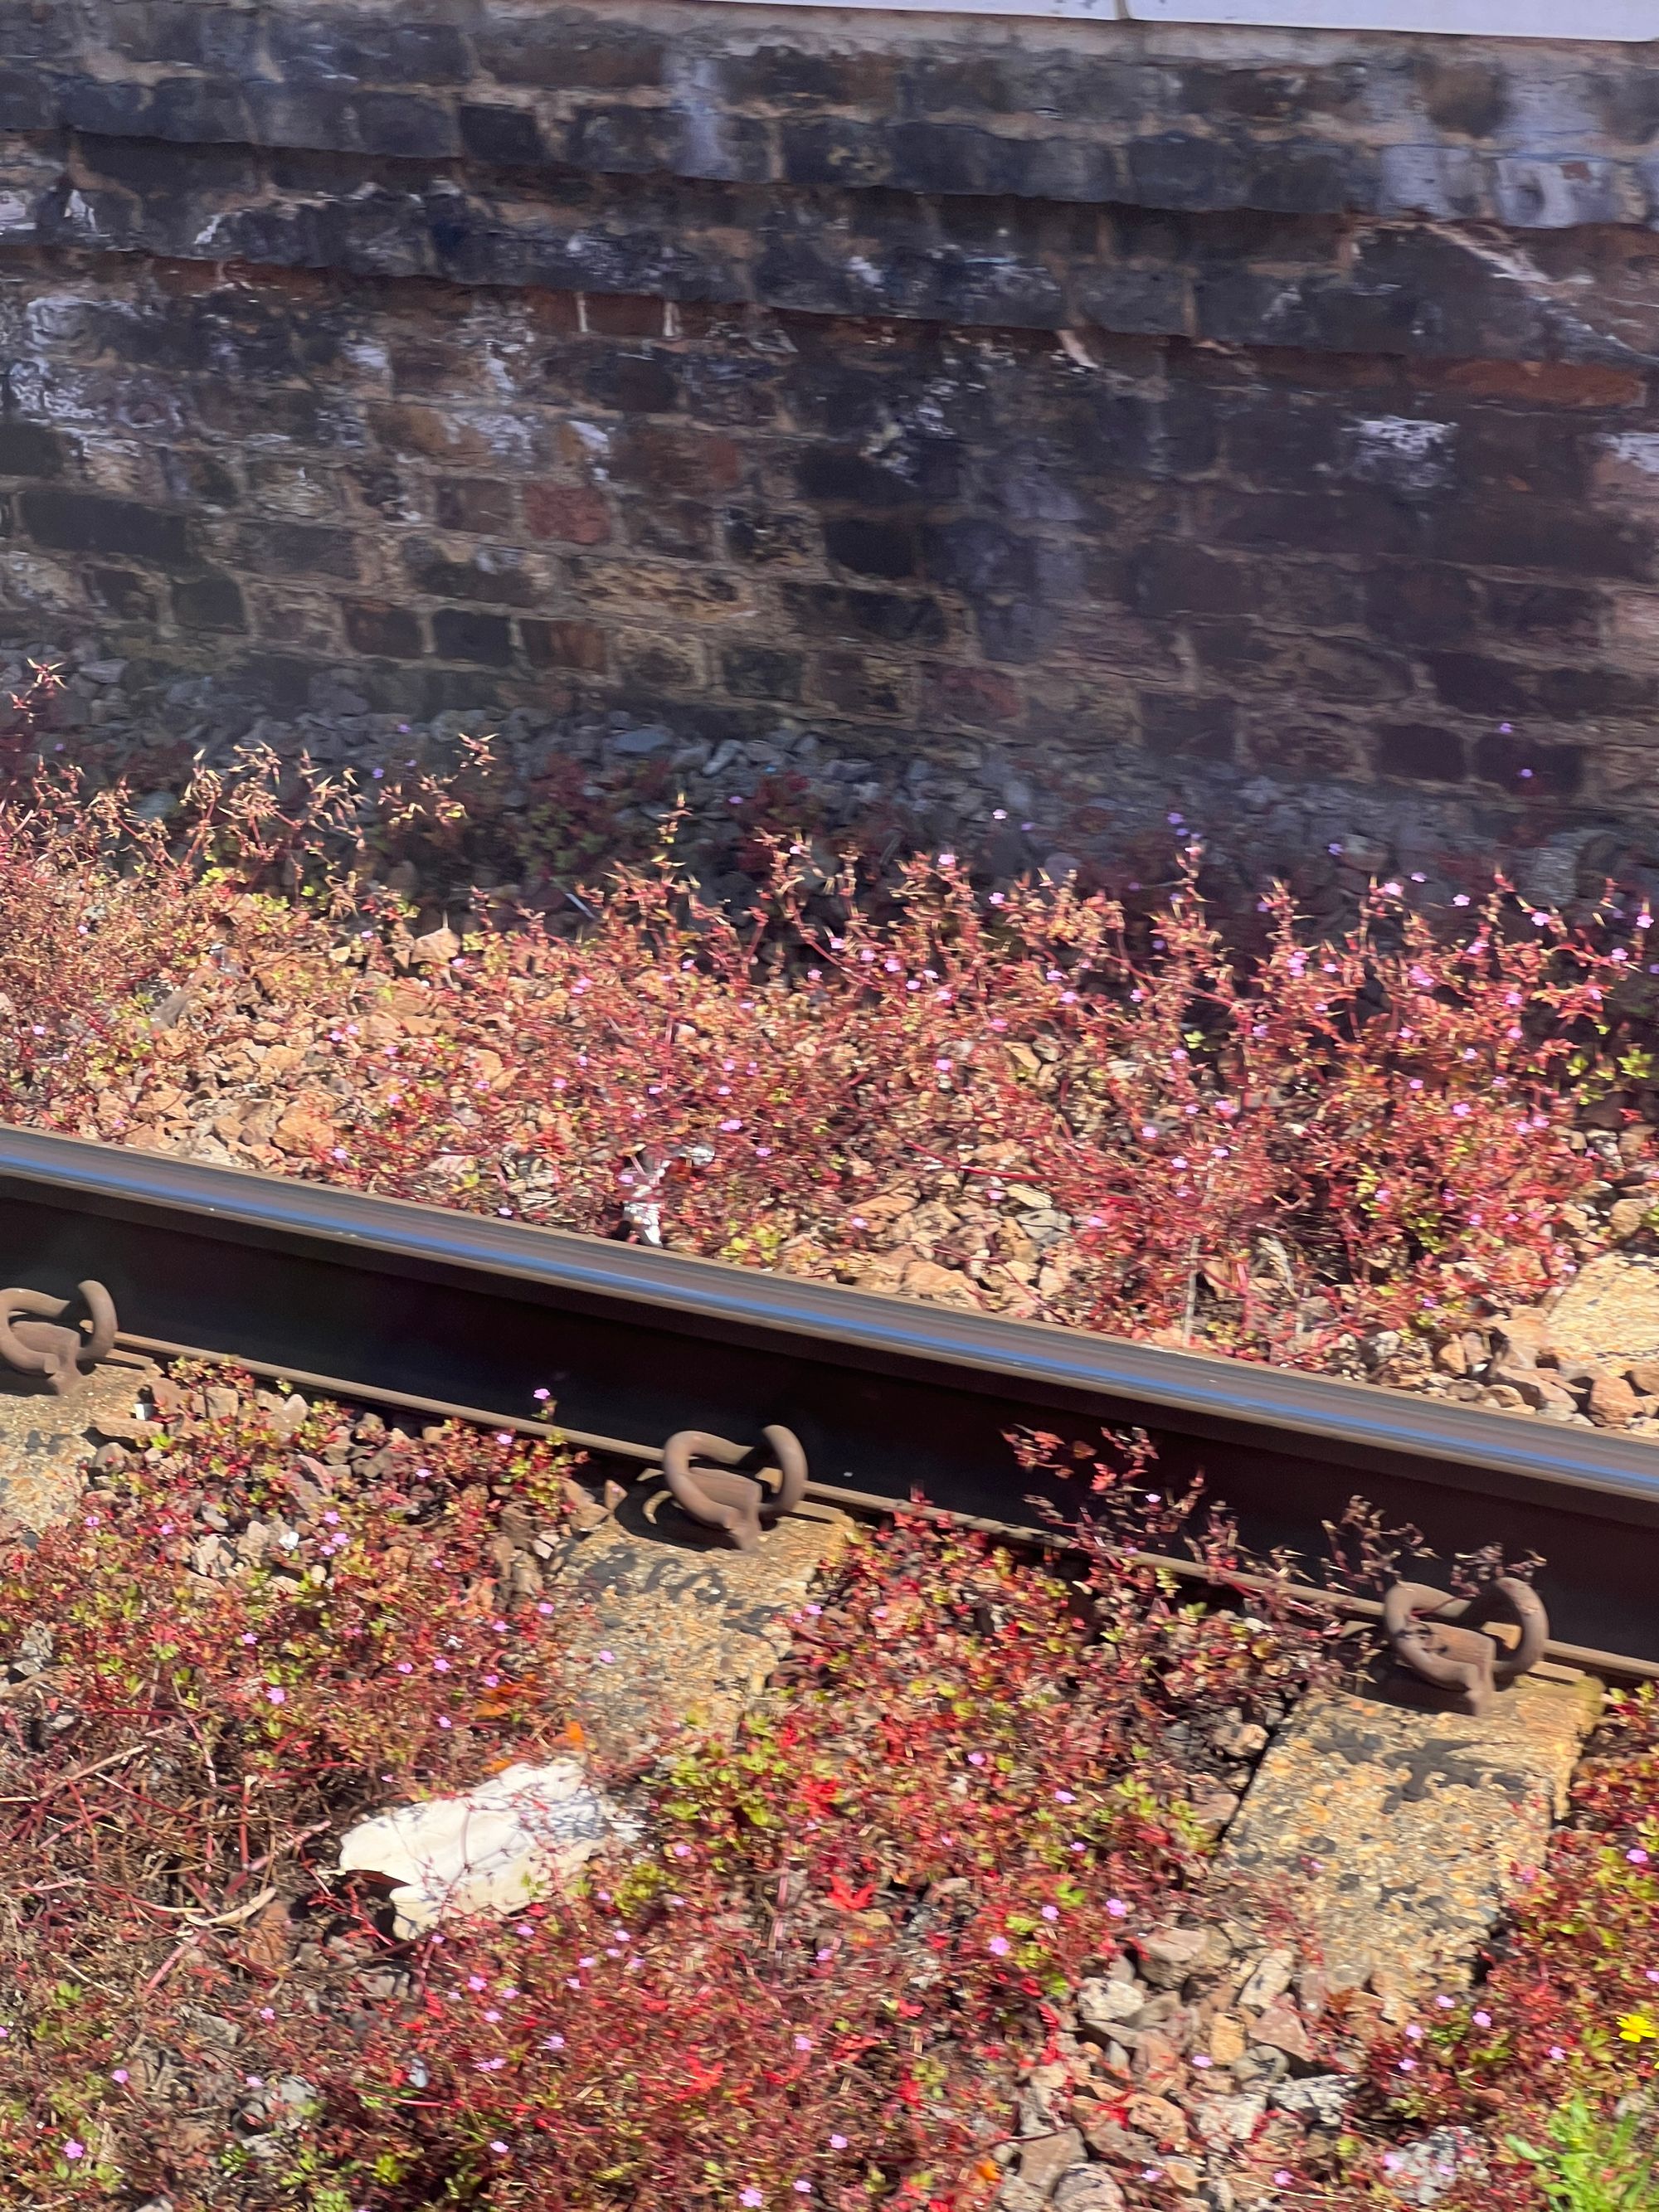 A railway line taken from a train, with a rail, sleepers, ballast, and a brick platform, with red vegetation growing through the ballast.